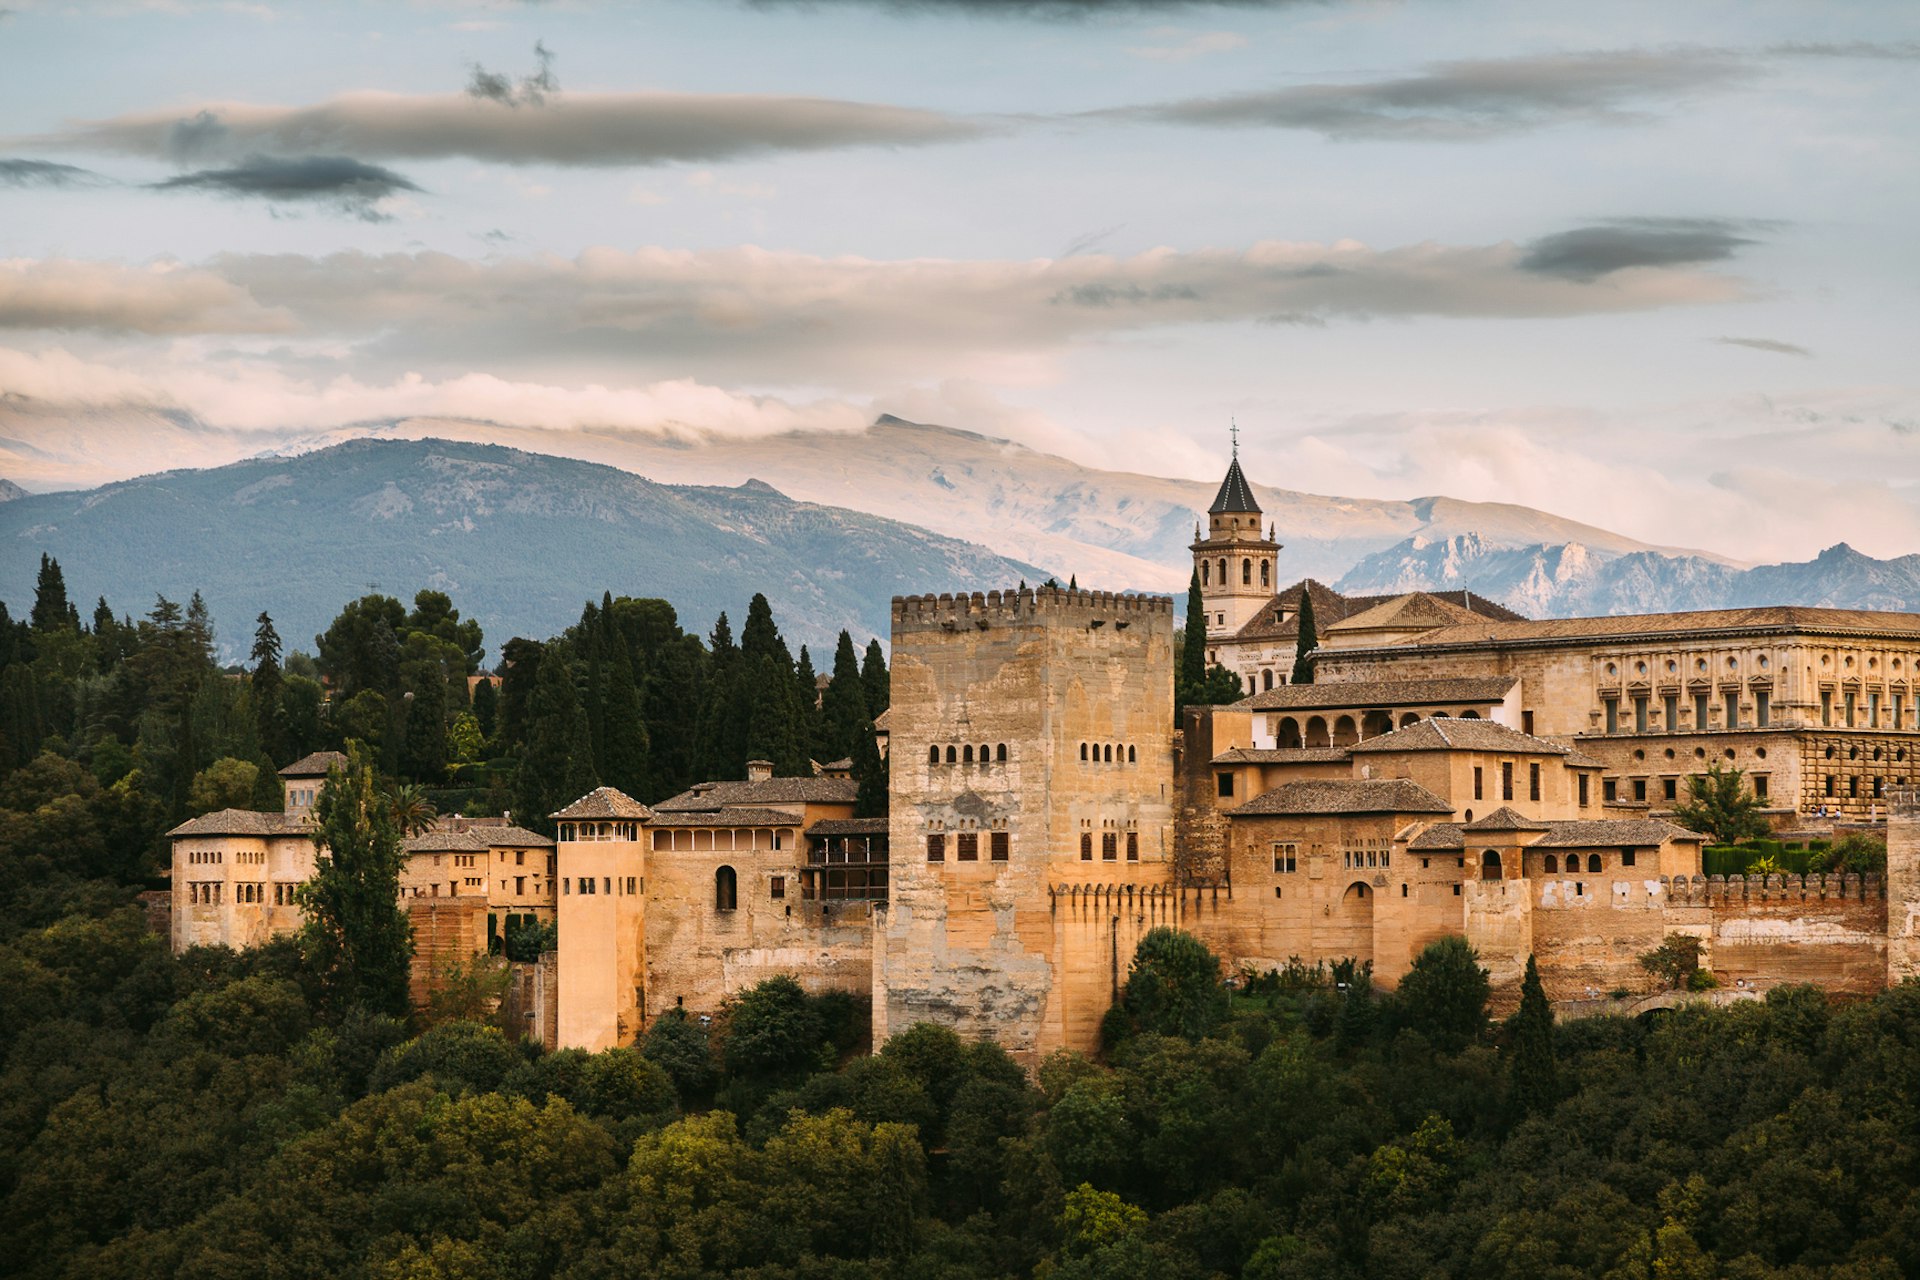 The large palace of the Alhambra sits on a hill with mountains in the background. 